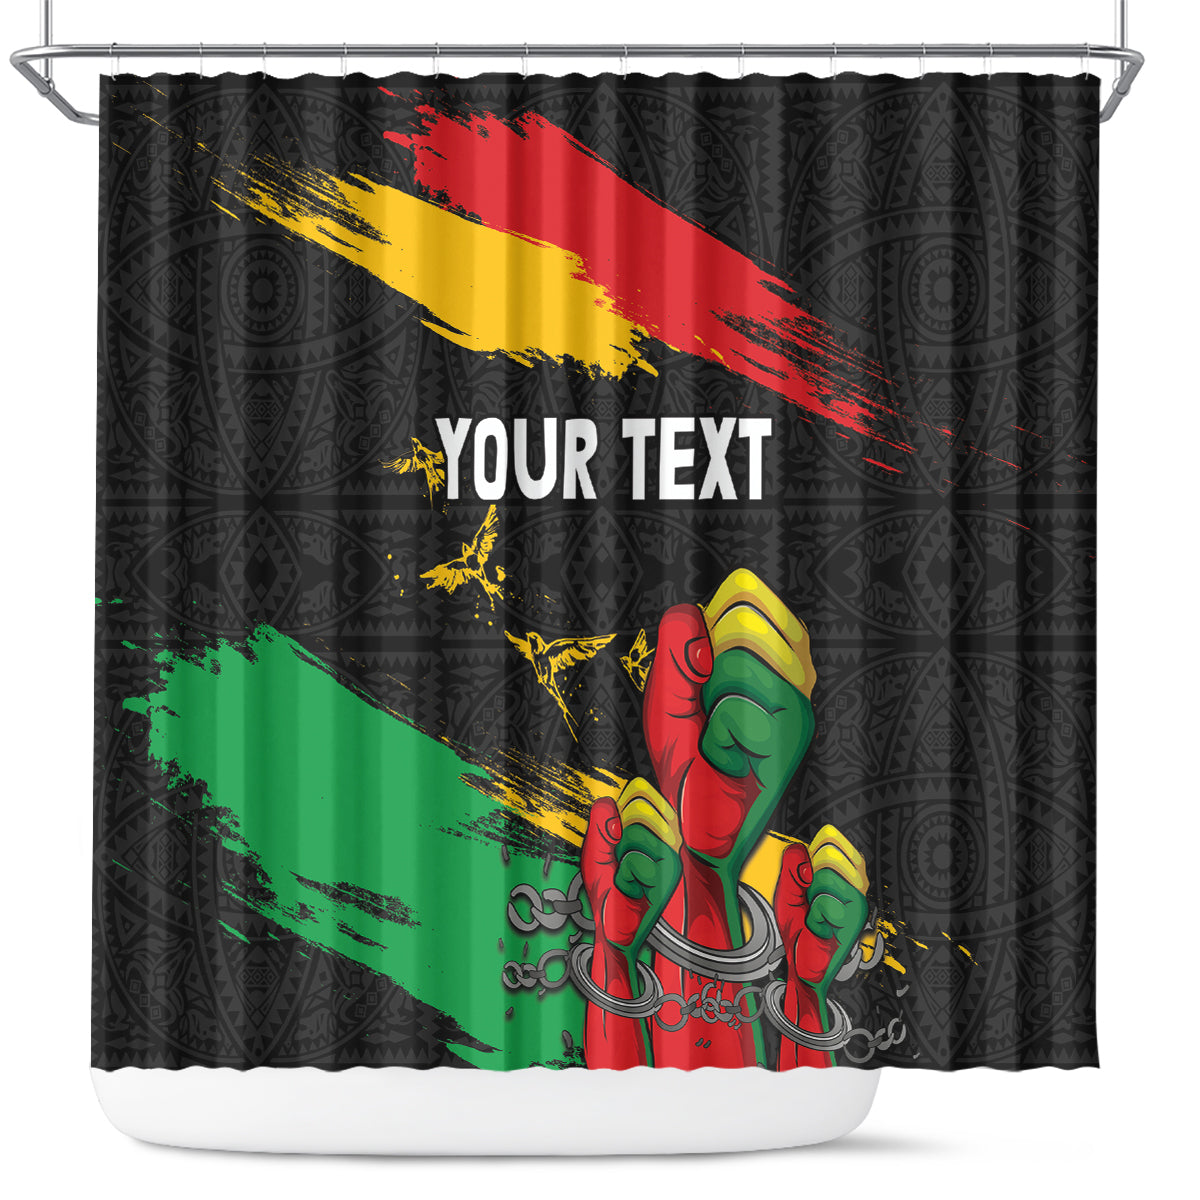 Personalized Juneteenth Freedom Day Shower Curtain Raised Fist Black Power and Africa Pattern